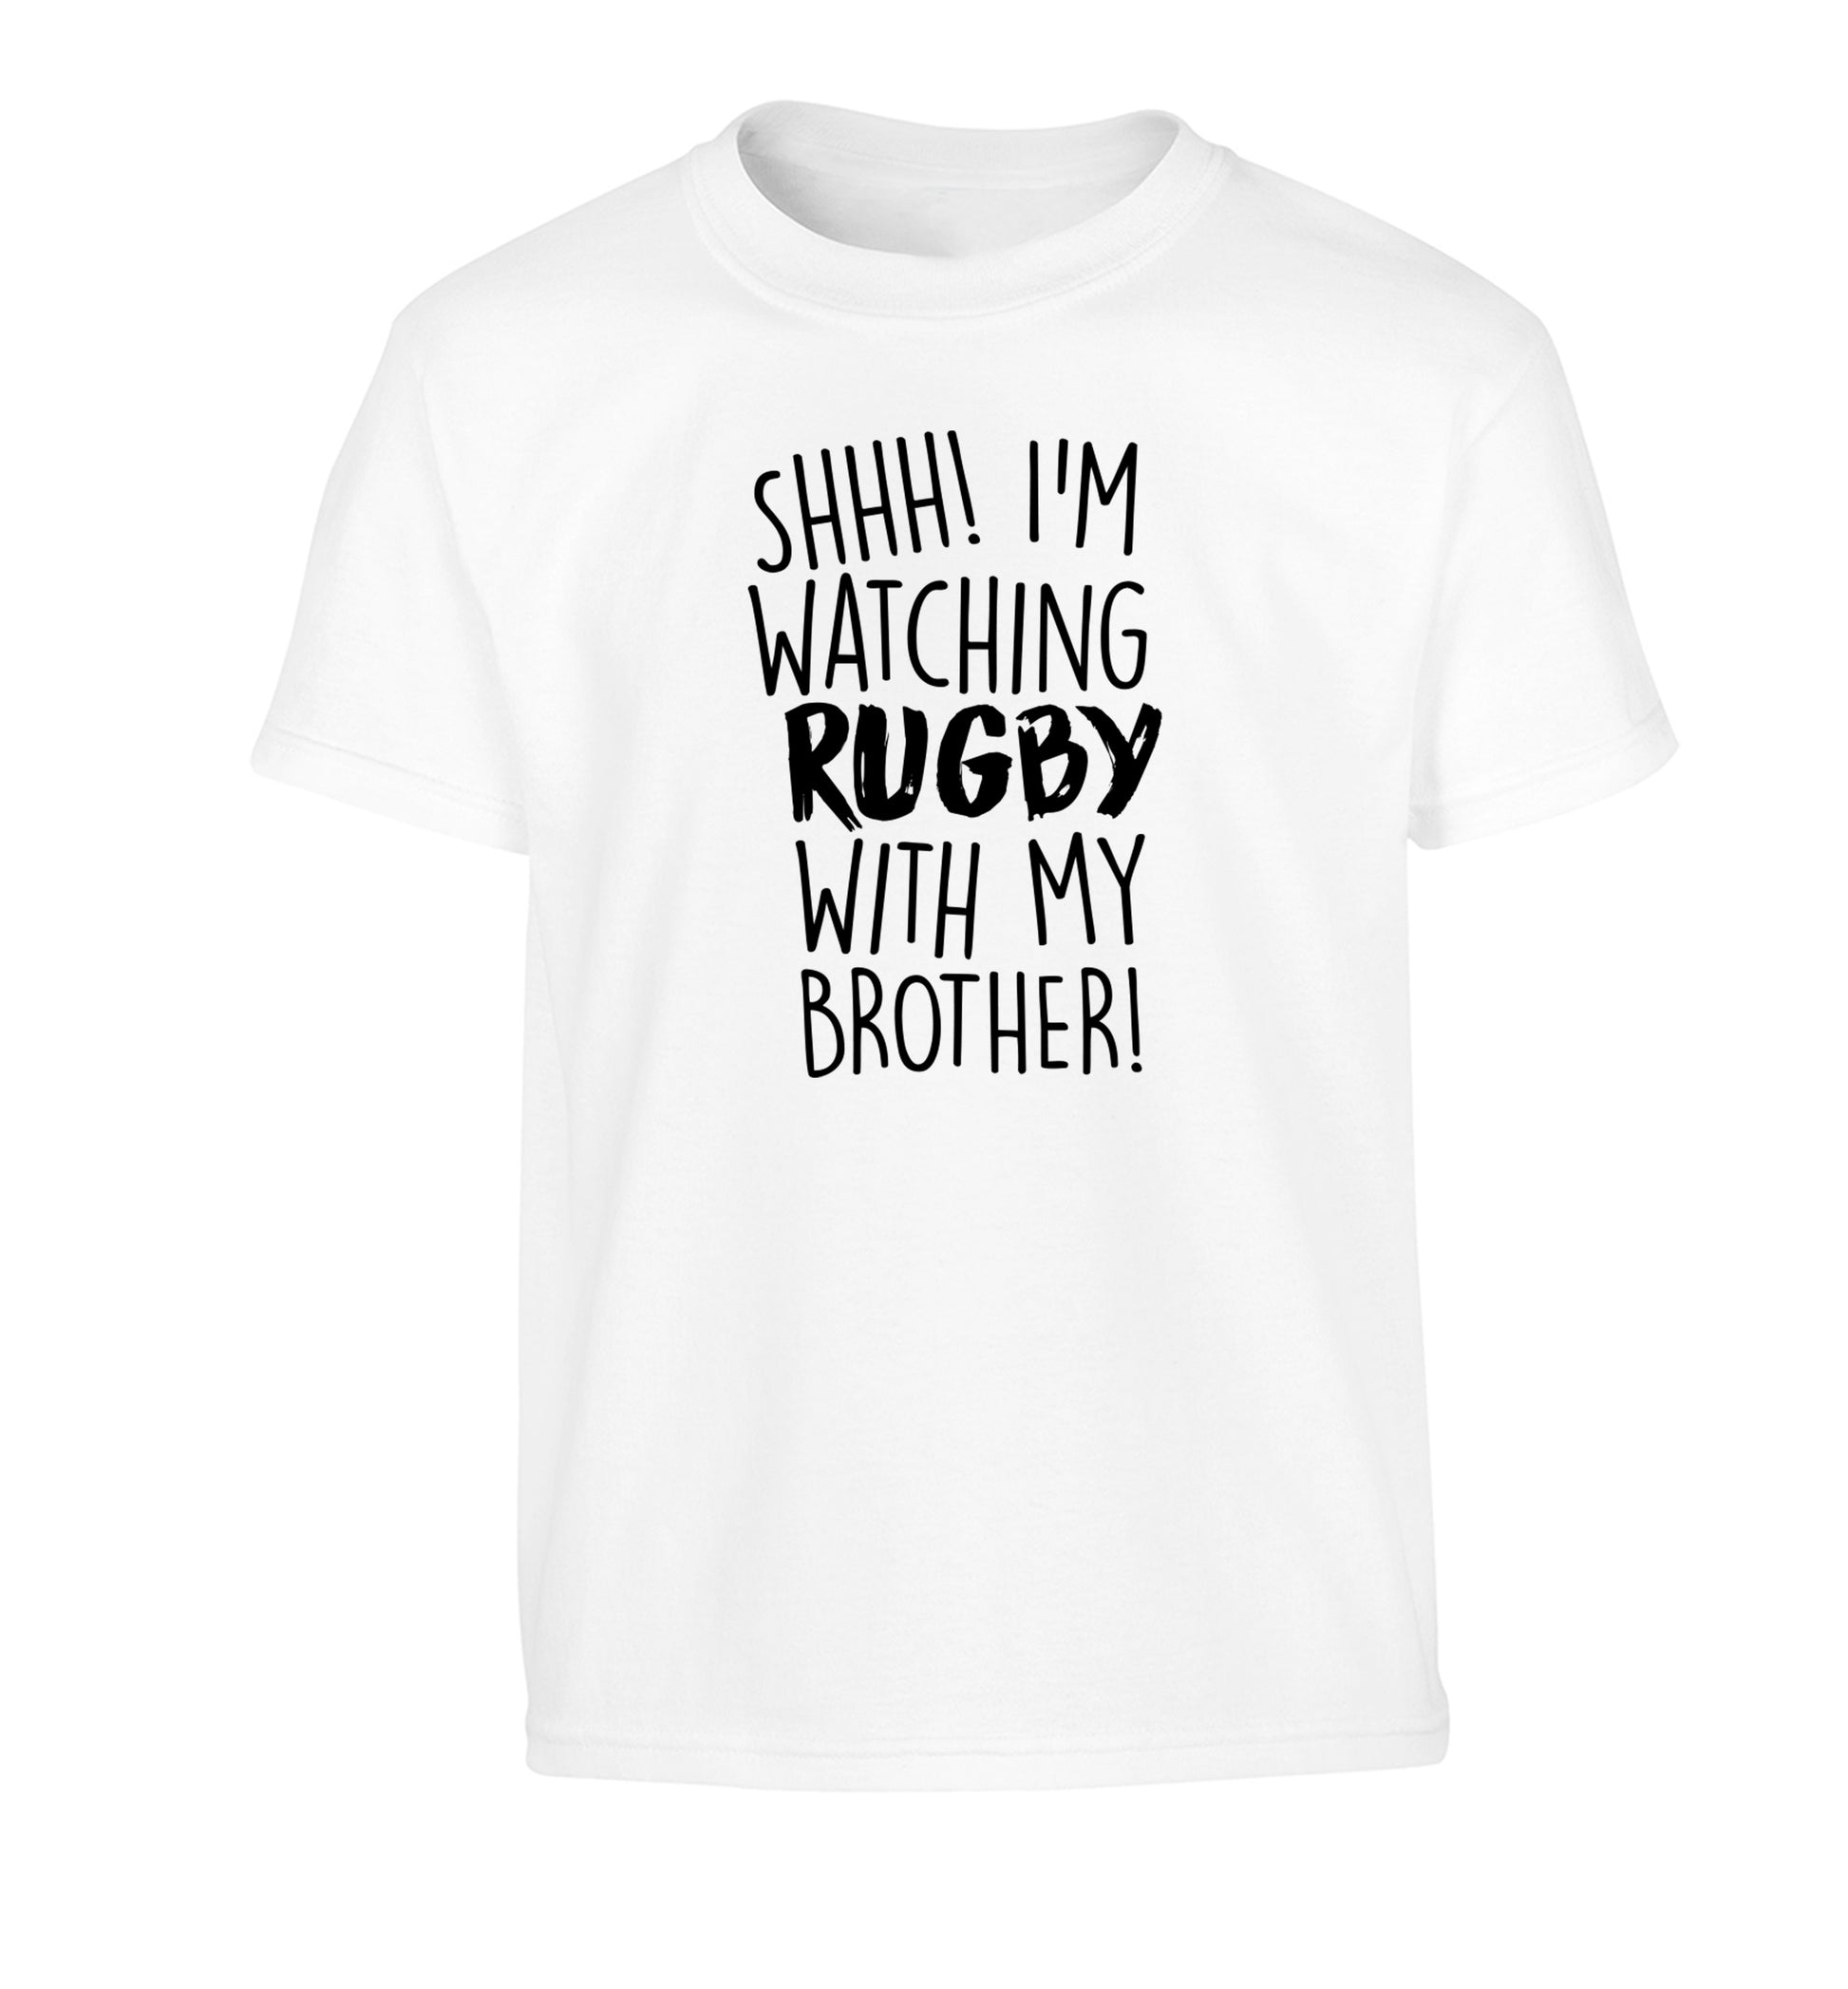 Shh... I'm watching rugby with my brother Children's white Tshirt 12-13 Years